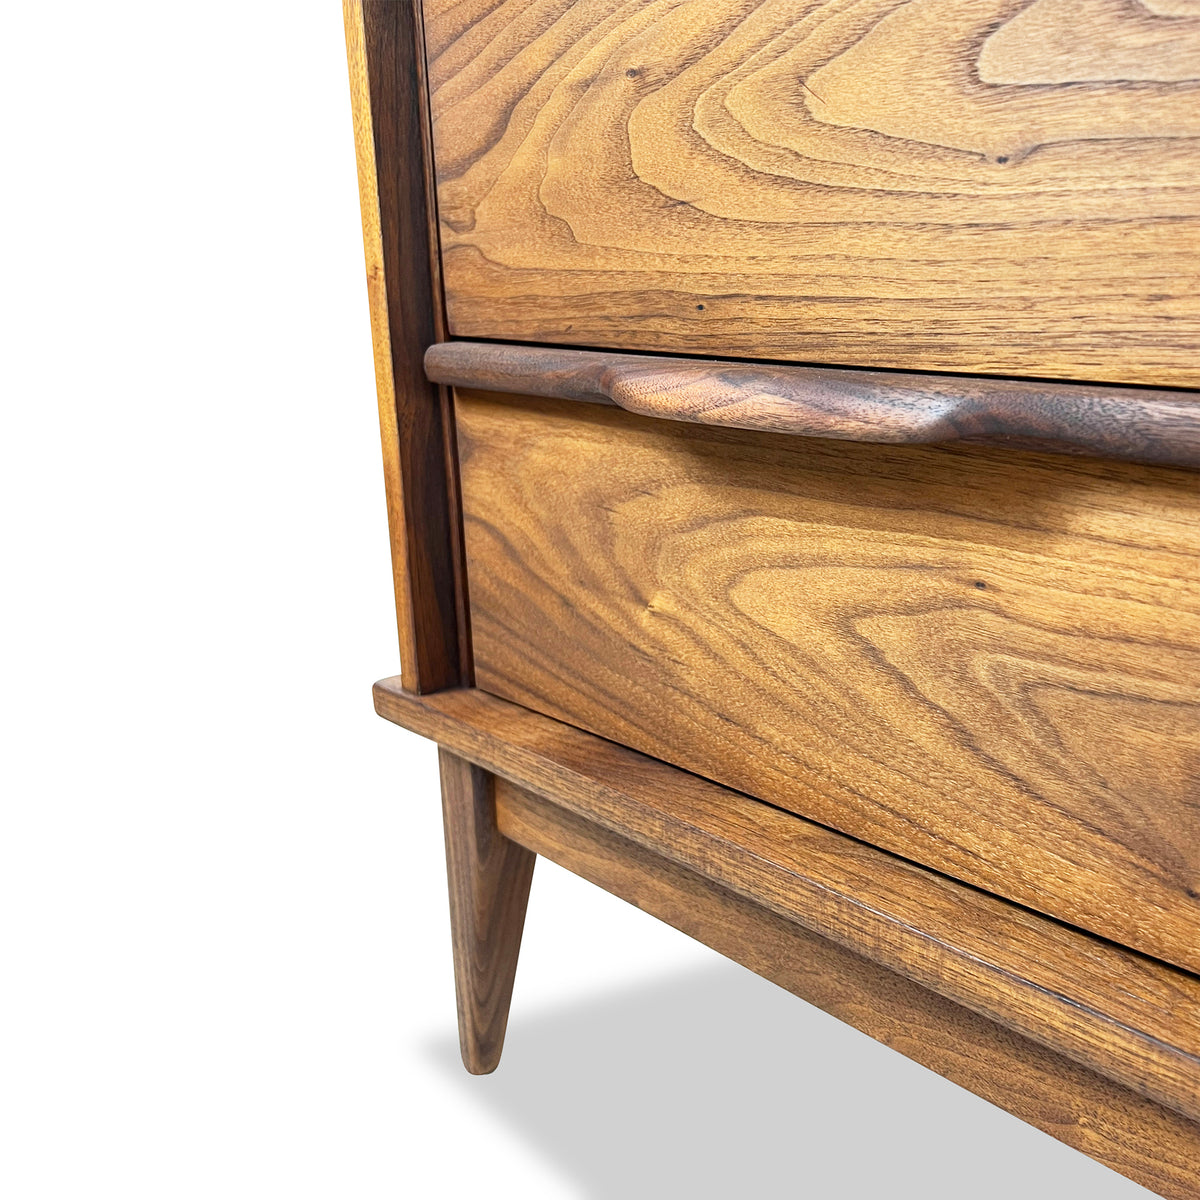 Walnut Nightstands by Princeville